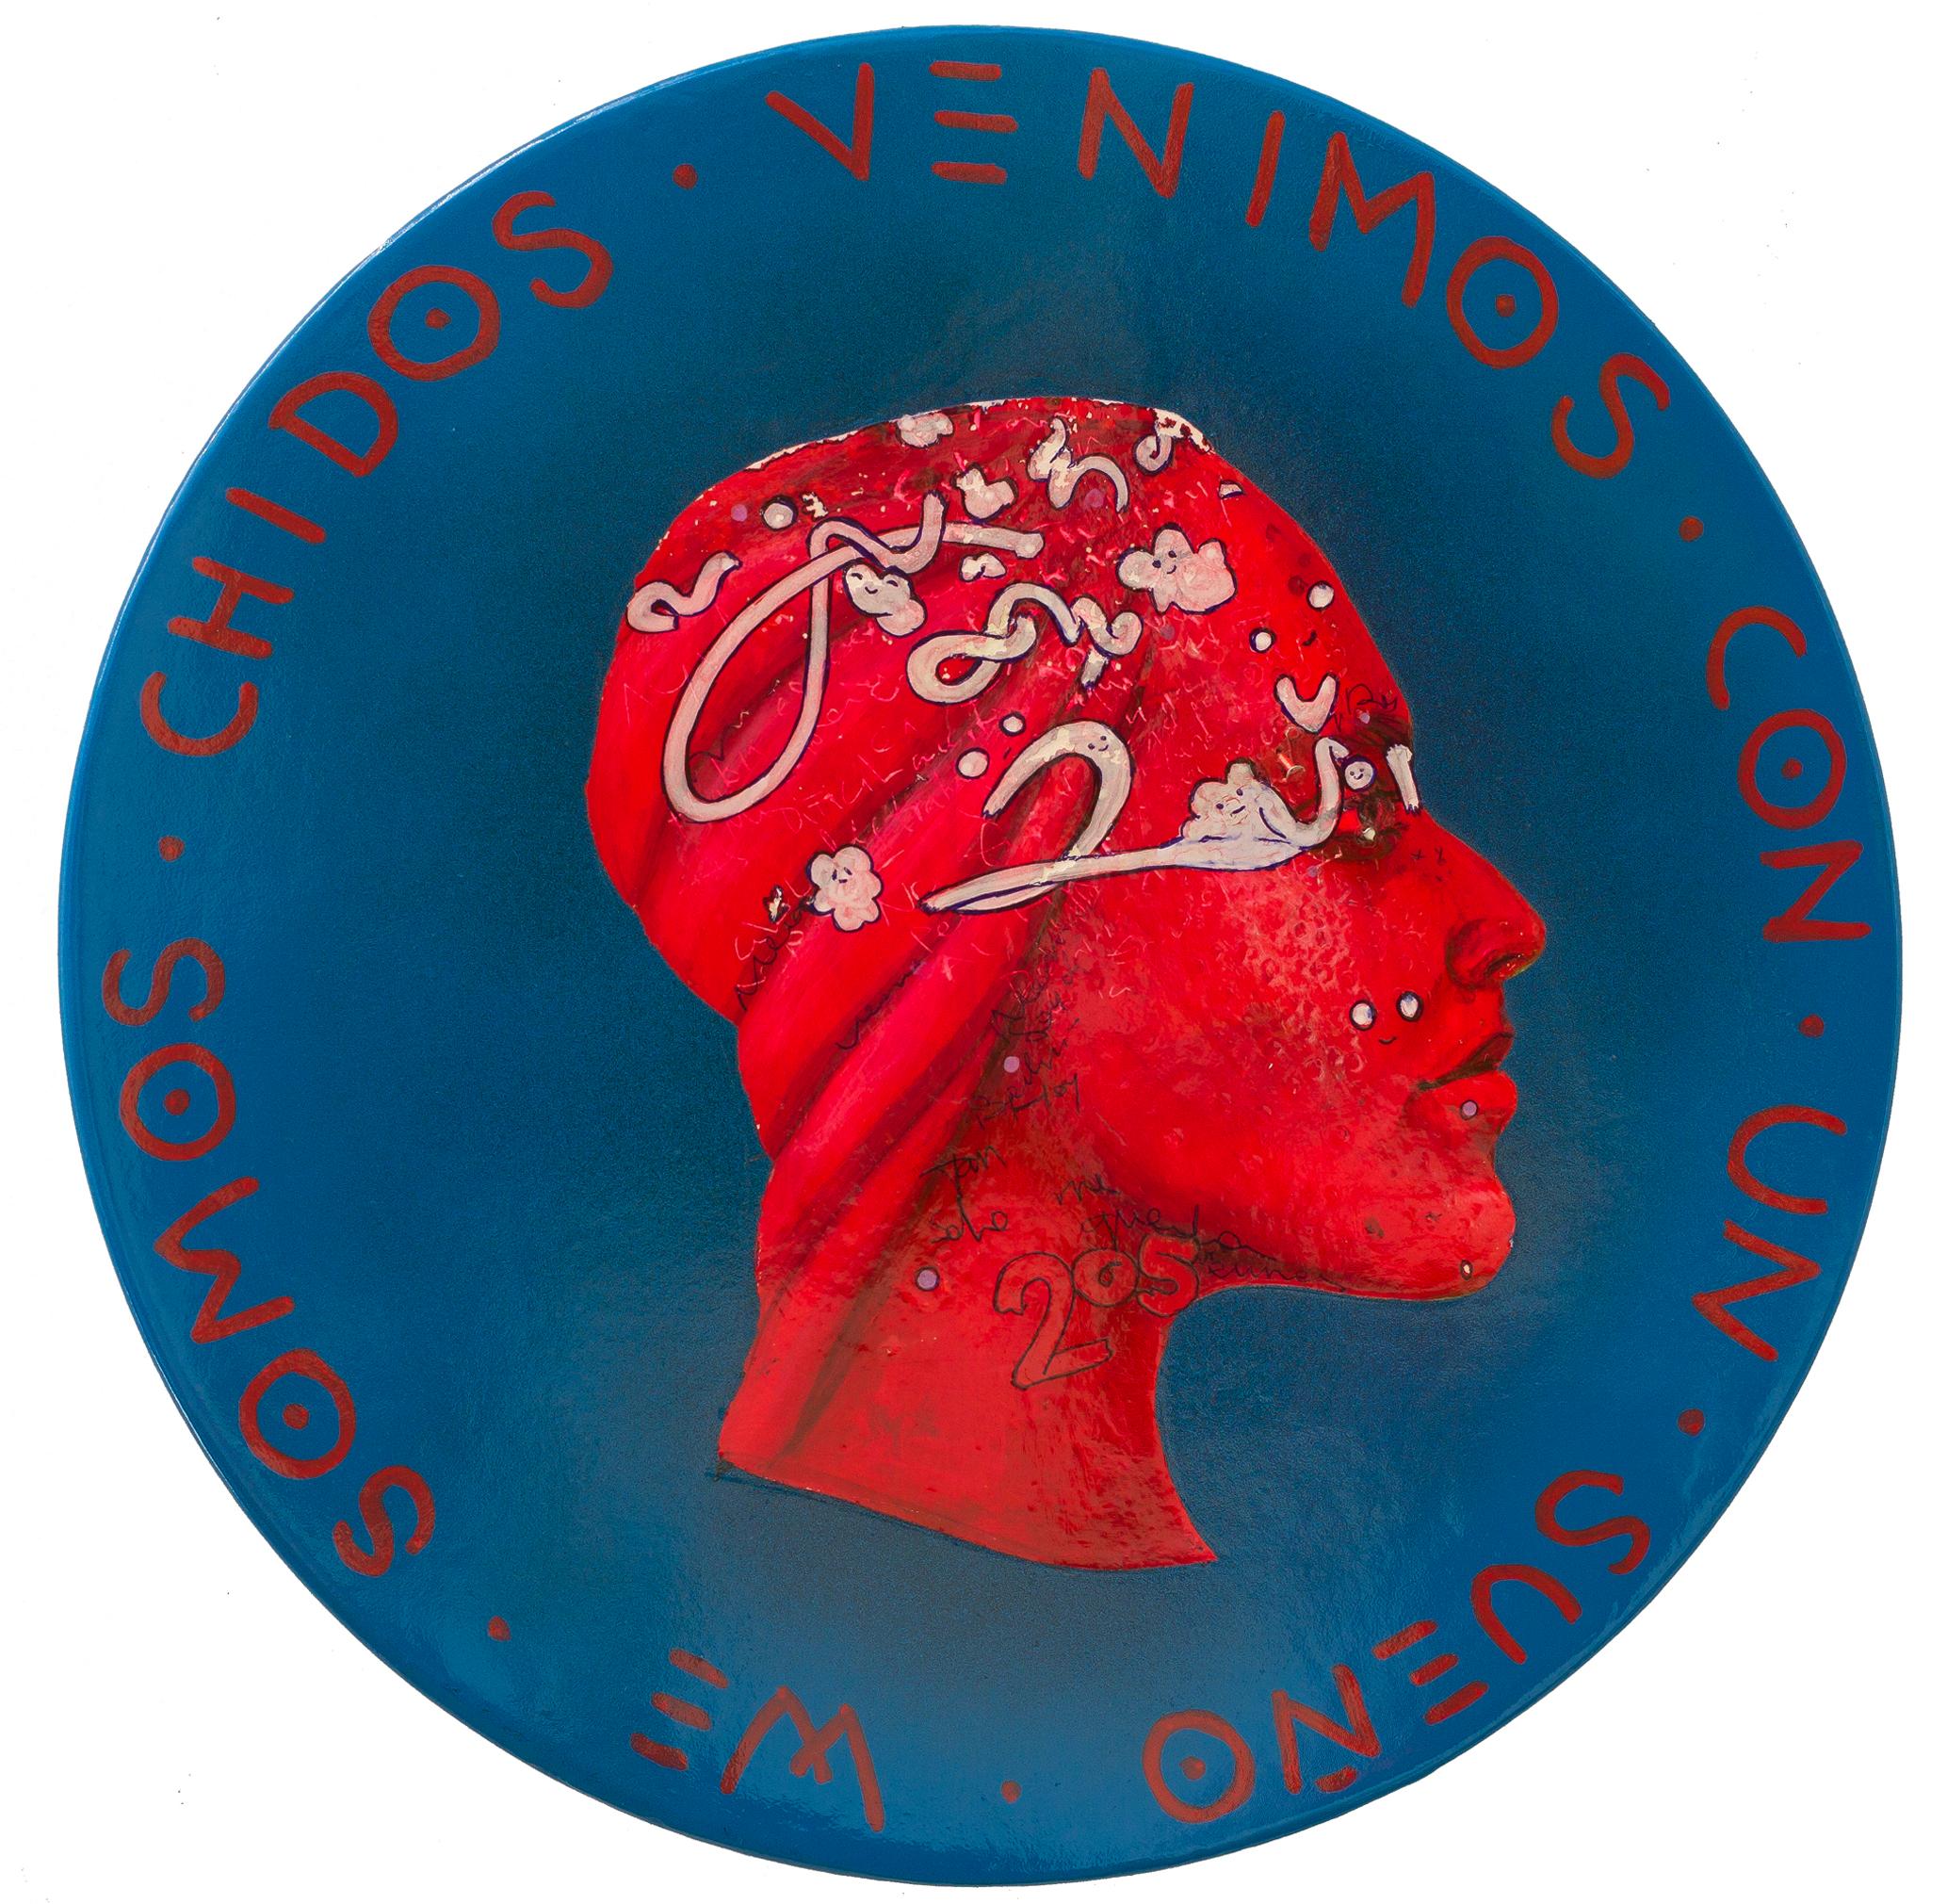 Red Fluor Side Profile Female Portrait. Mexican Latin Blue Coin "Currency #175" - Mixed Media Art by Natasha Lelenco